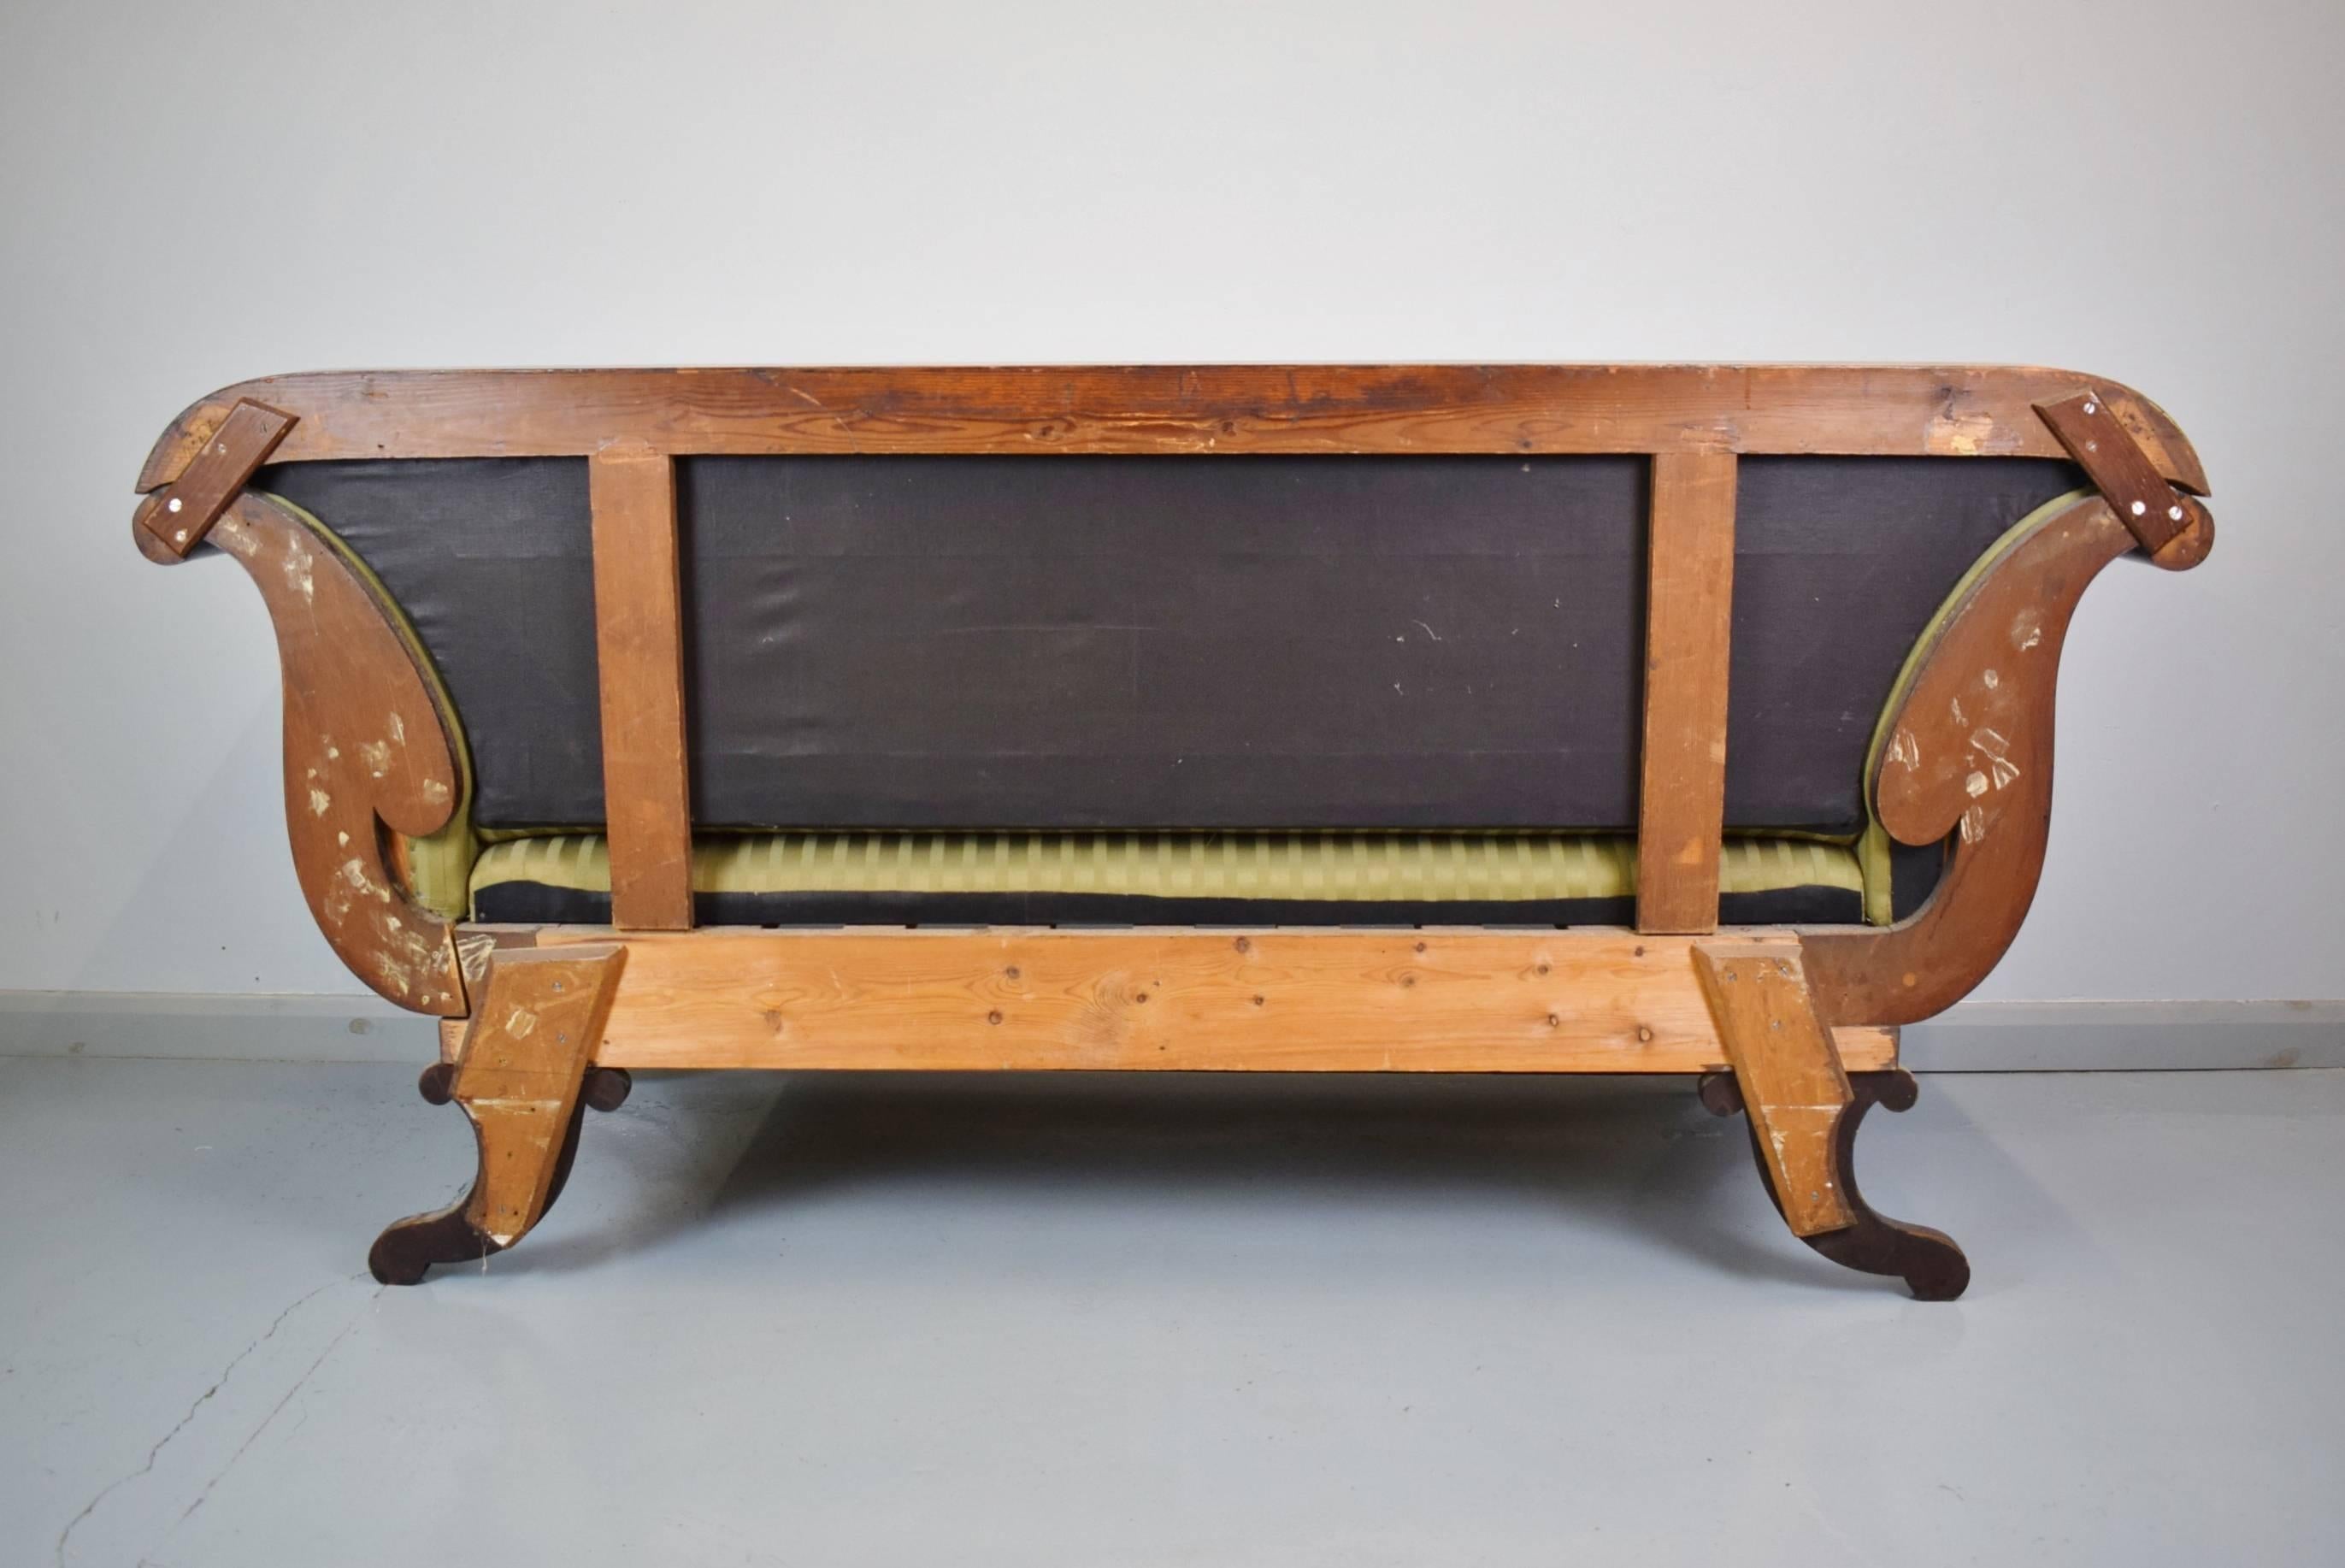 Stunning Victorian Regency Mahogany and Beech Scroll Arm Sofa Chaise, circa 1850 For Sale 1